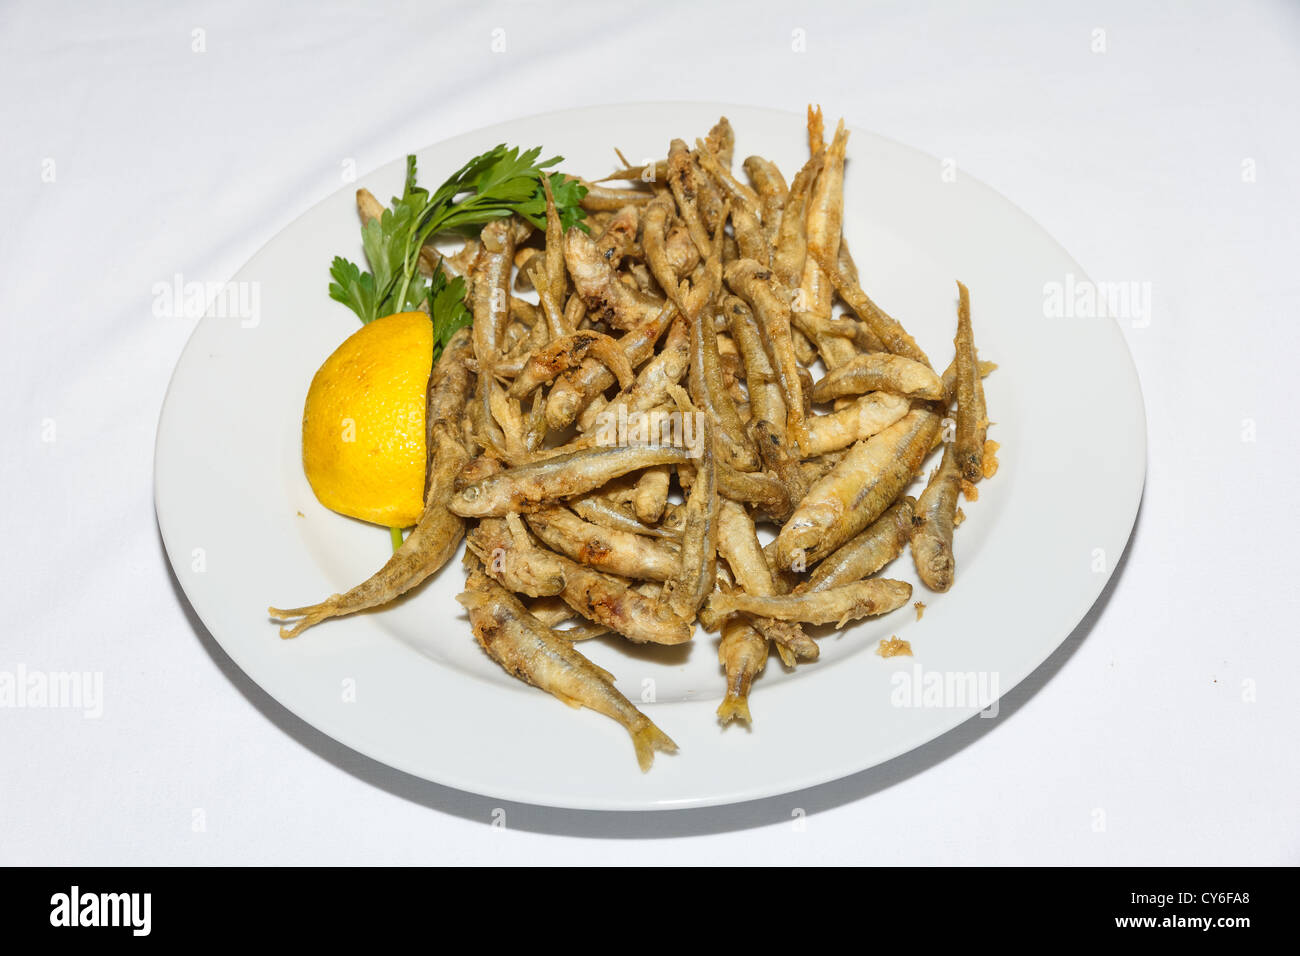 https://c8.alamy.com/comp/CY6FA8/small-fried-fishes-on-a-plate-with-lemon-a-tasty-and-crunchy-dish-CY6FA8.jpg